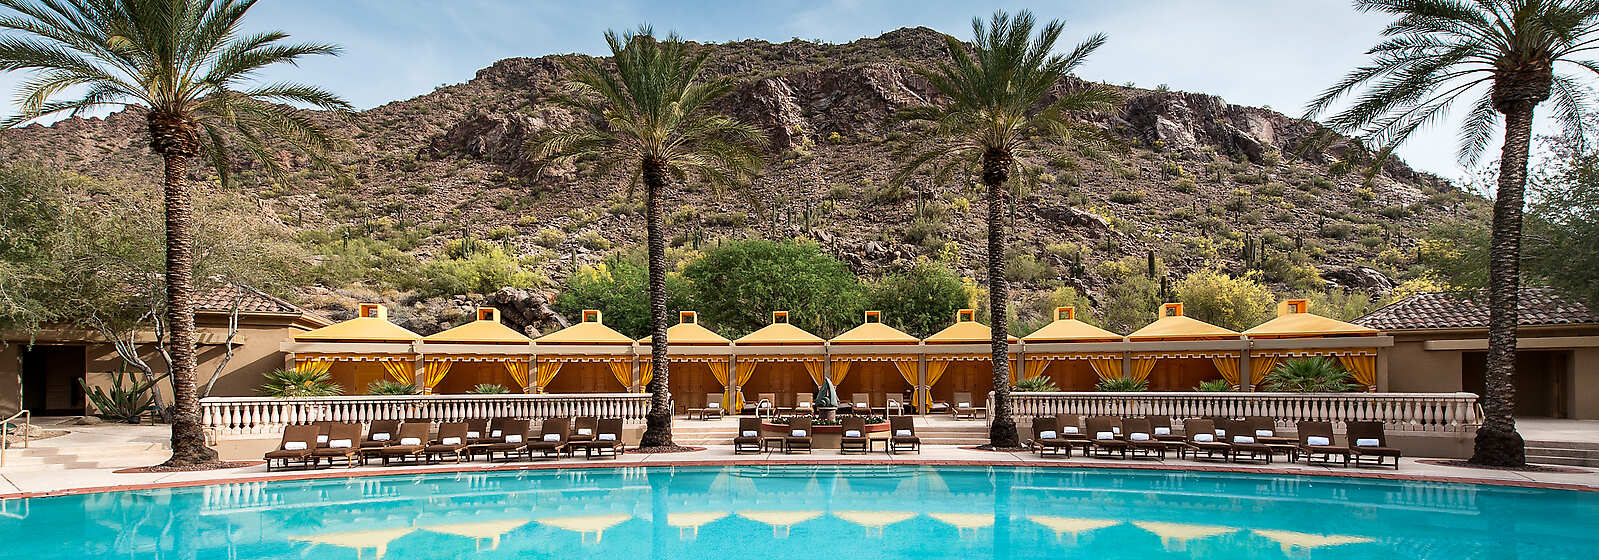 The Canyon Suites at The Phoenician pool